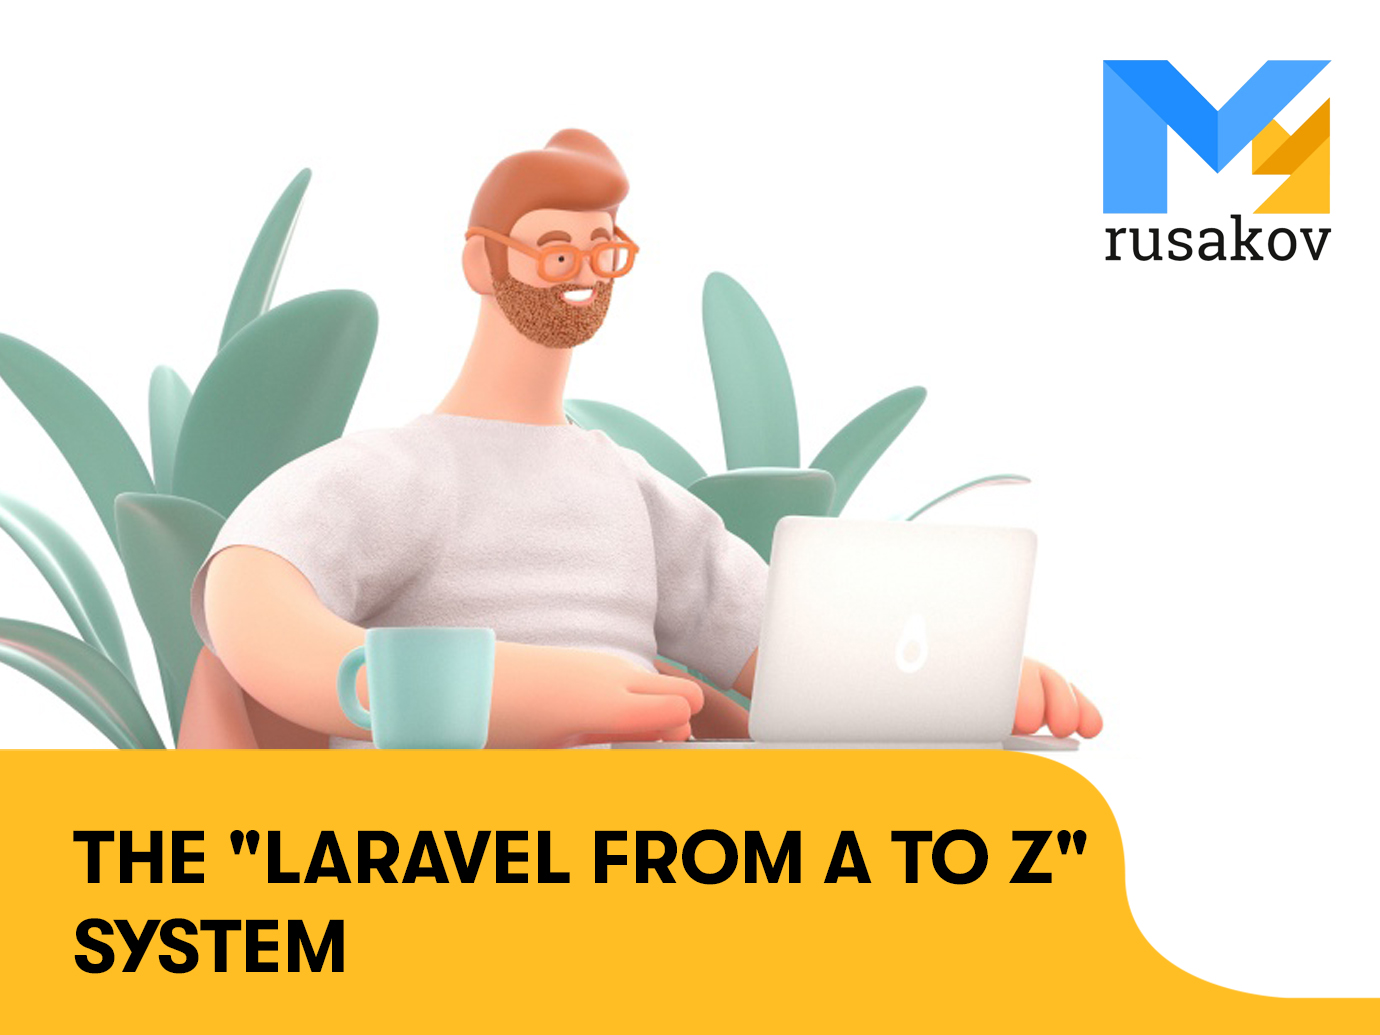 The “Laravel from A to Z“ system